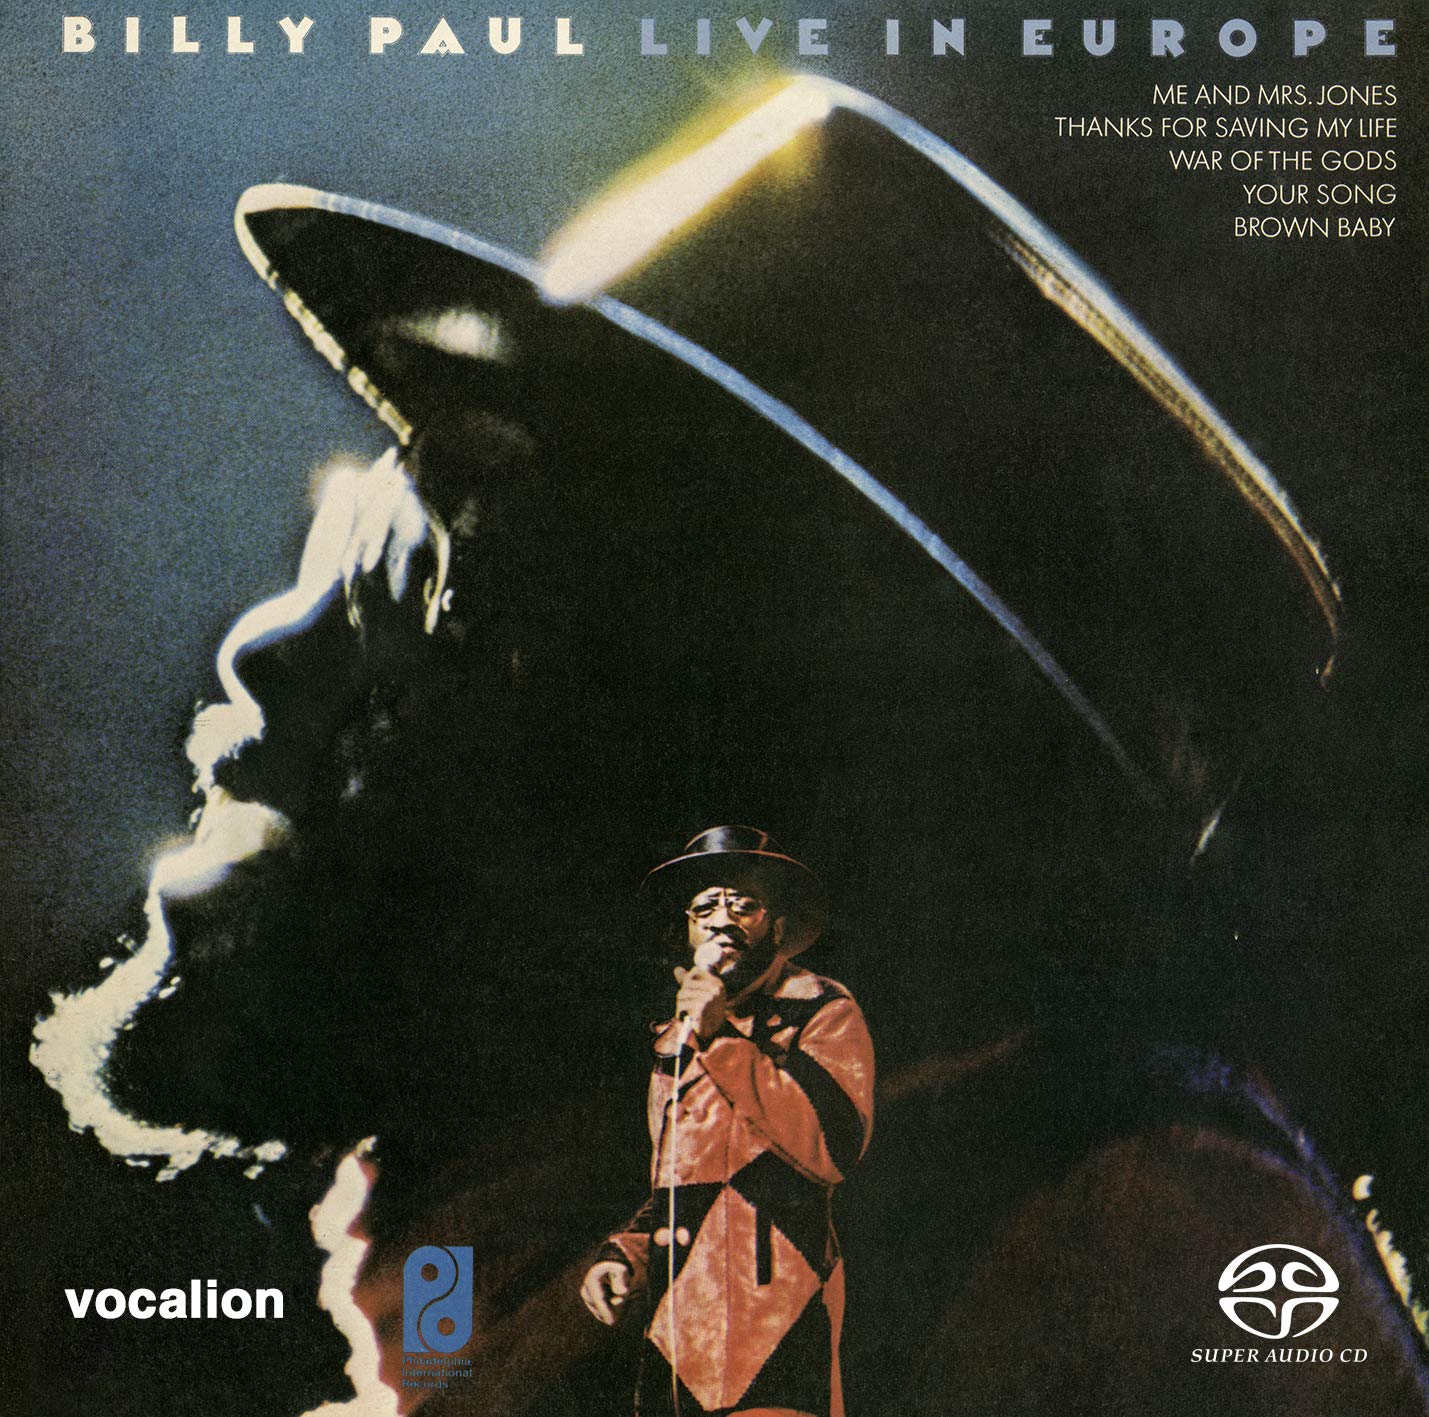 Billy Paul – Live In Europe (1974) [Reissue 2018] MCH SACD ISO + Hi-Res FLAC